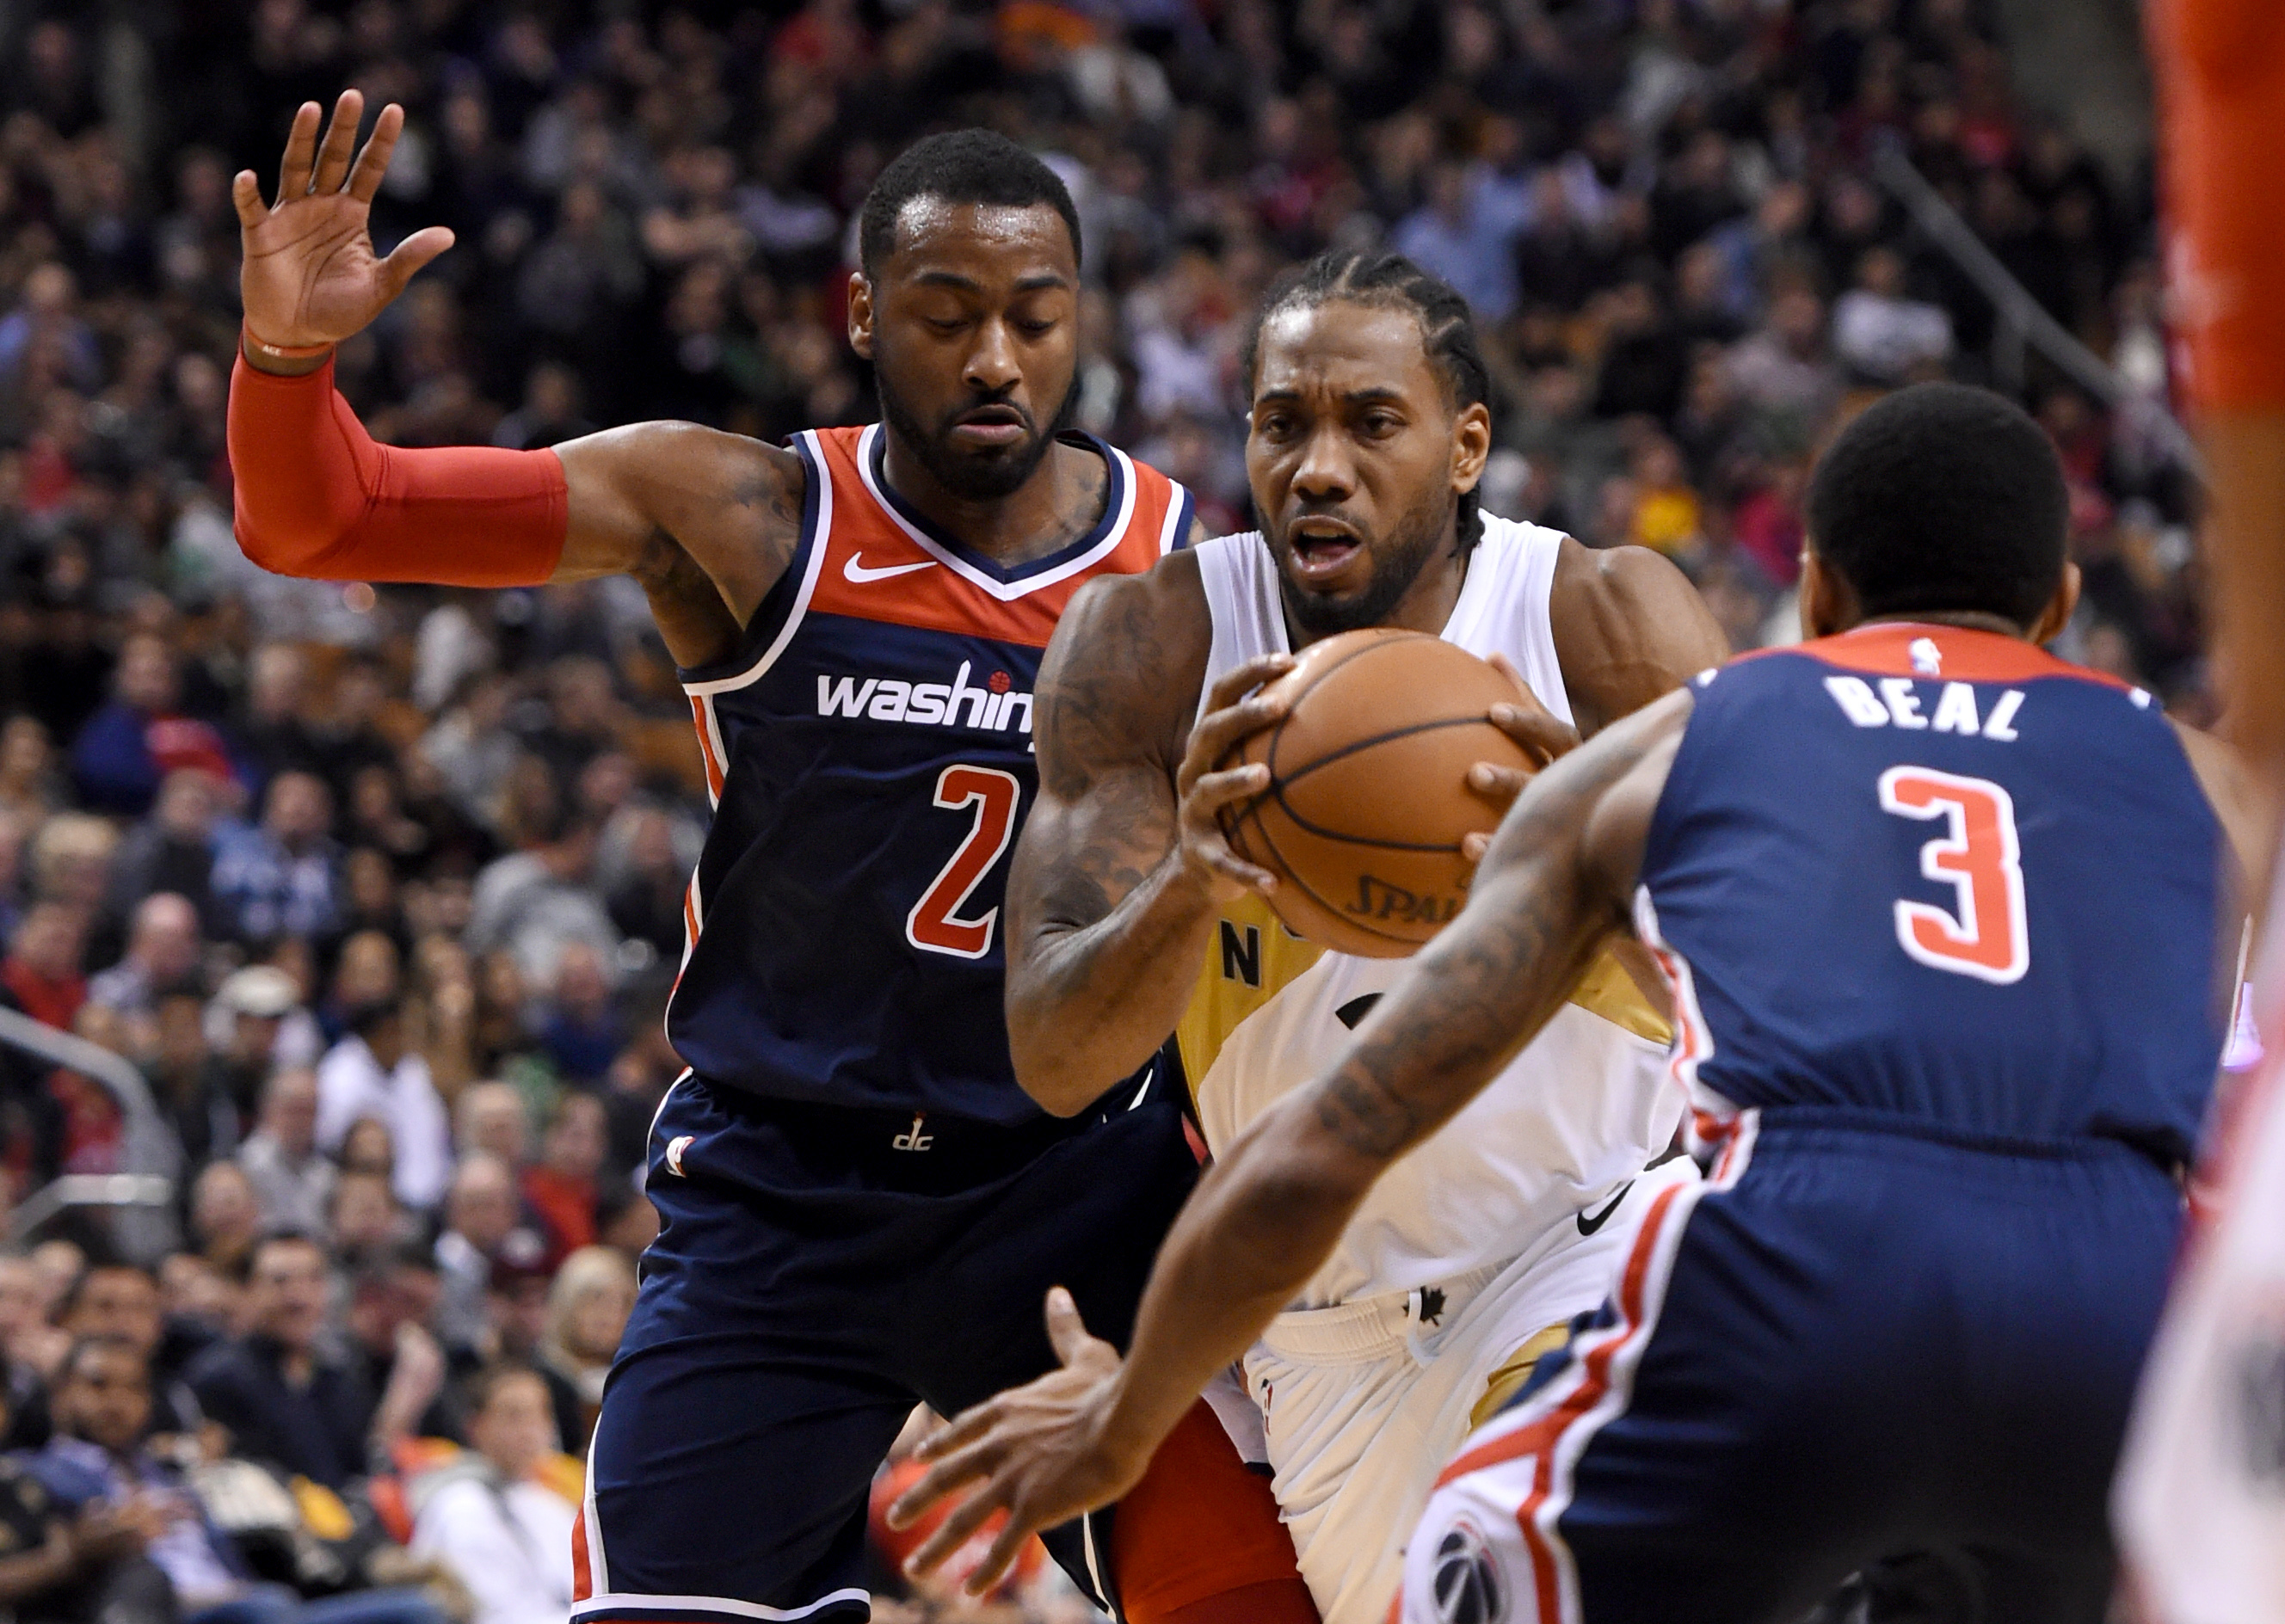 Wizards outmatched by Kawhi Leonard, Raptors | The Sports Daily